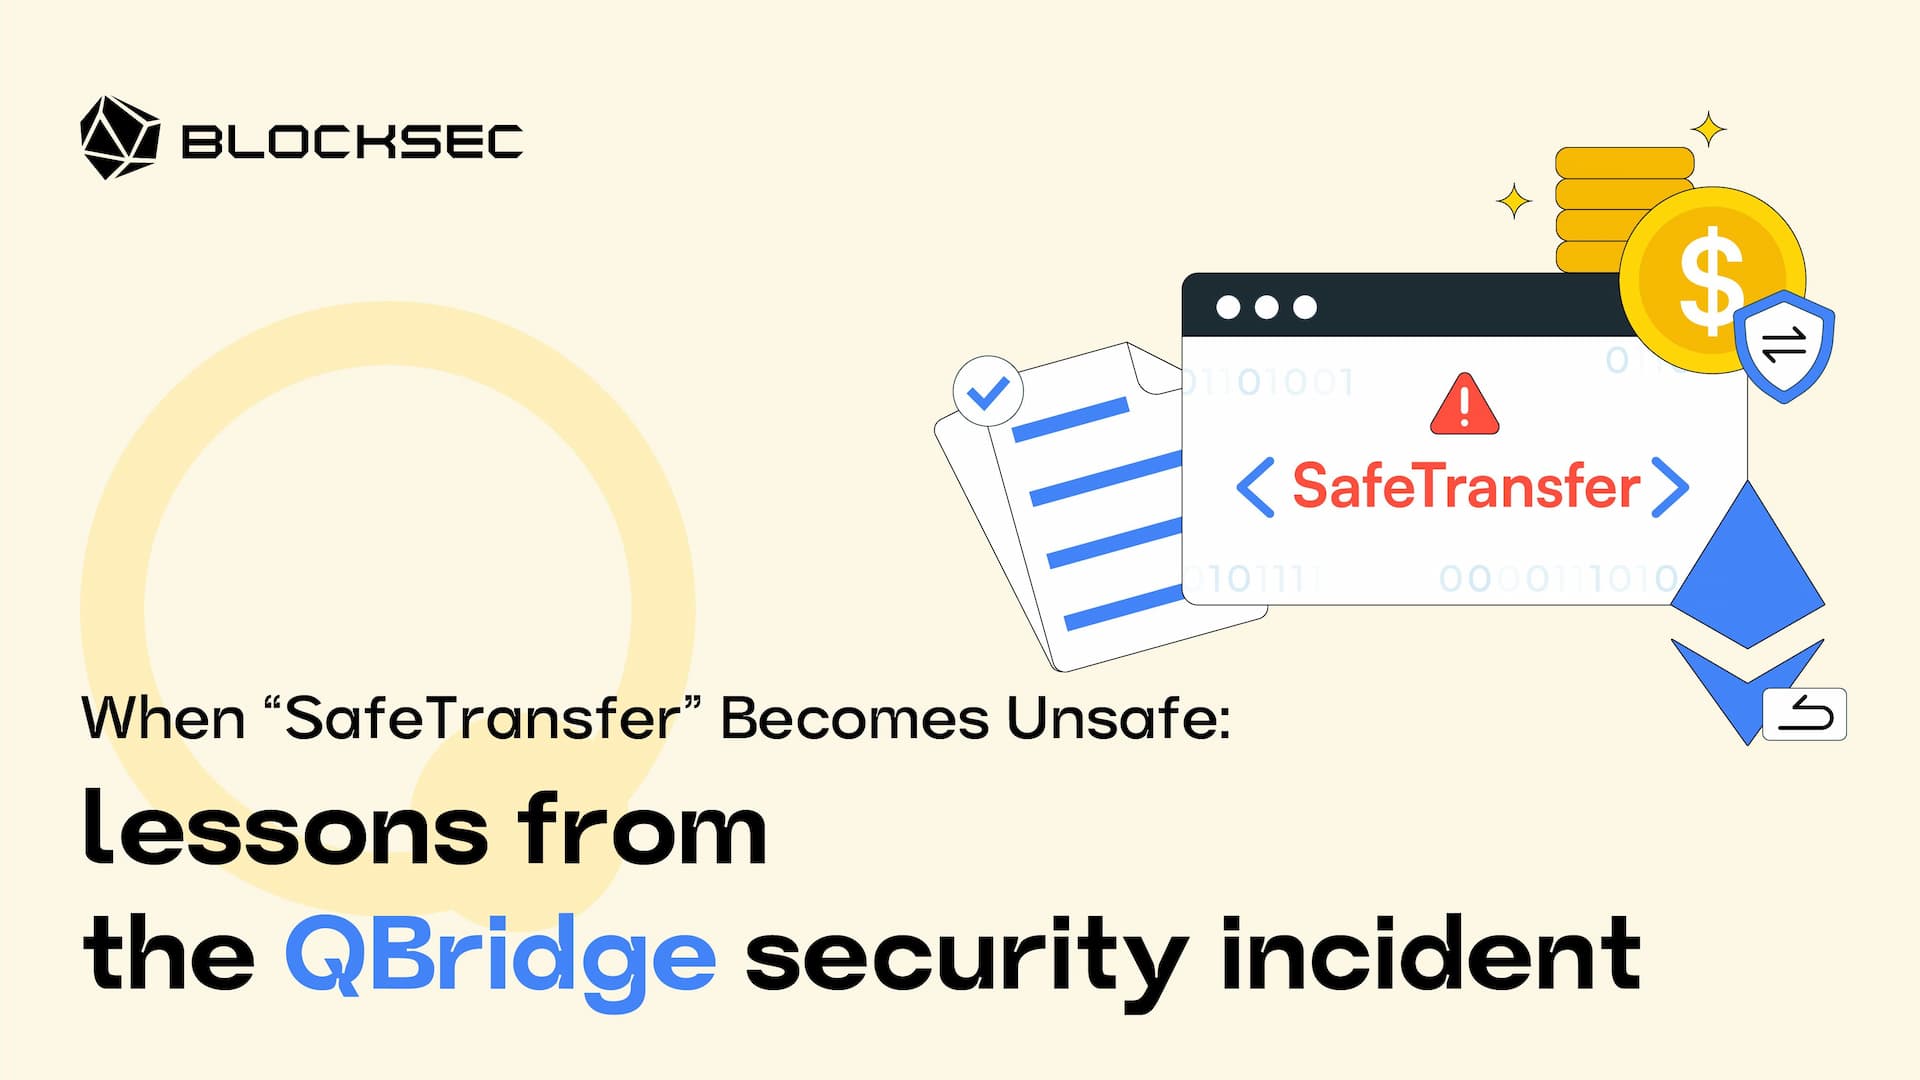 When "SafeTransfer" Becomes Unsafe: Lessons from the QBridge Security Incident